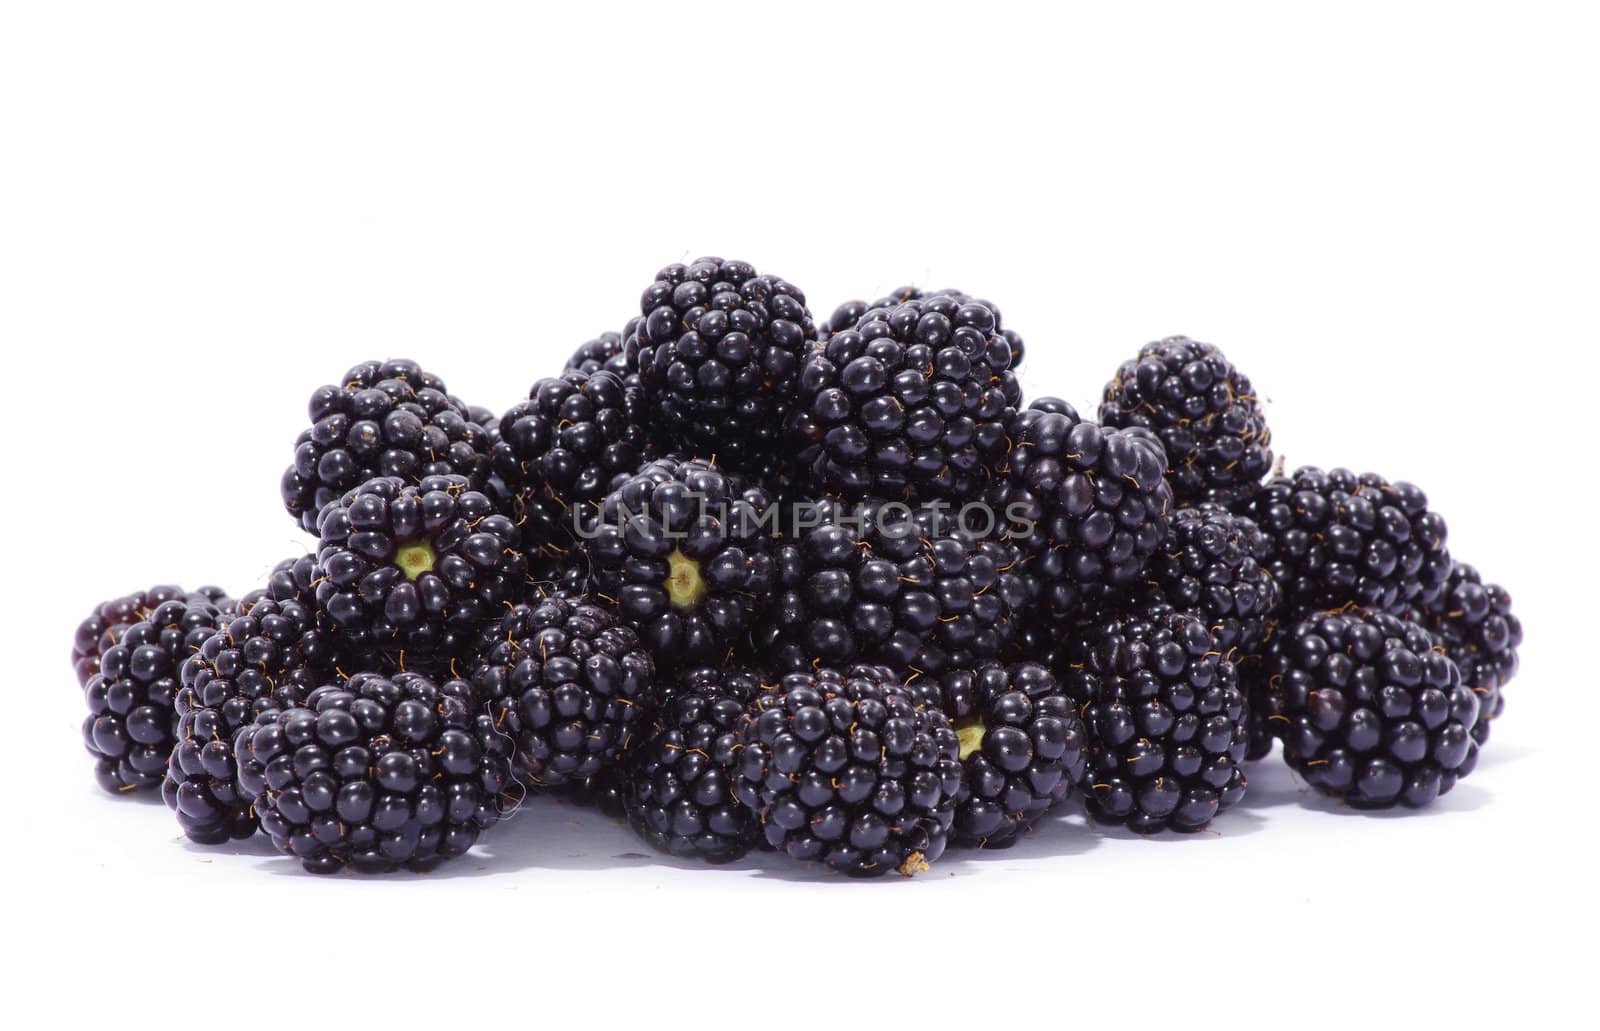 blackberry isolated on a white background